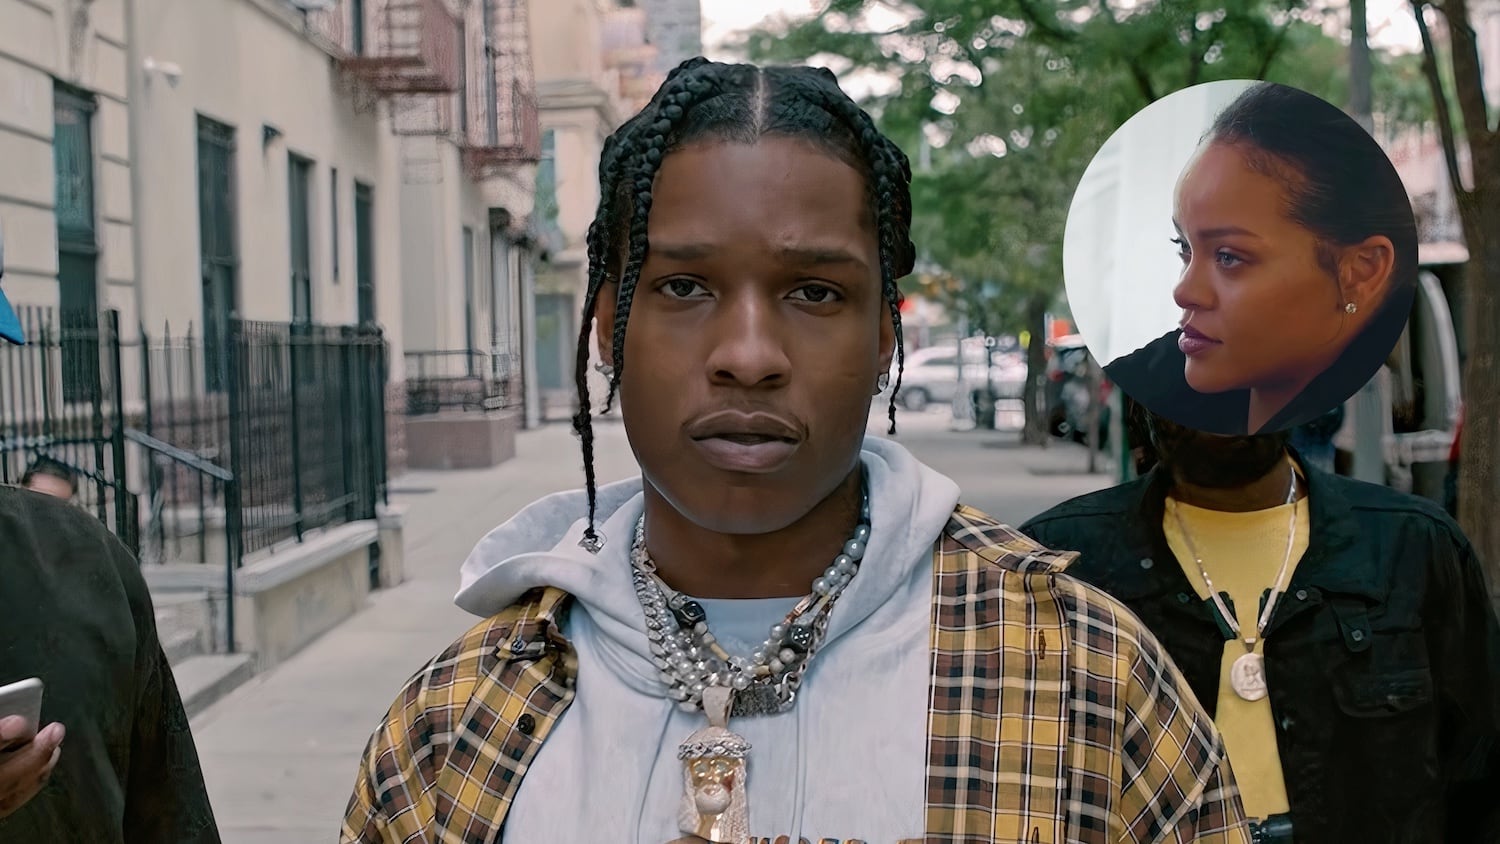 A$AP Rocky Arrested At LAX After Vacationing With Rihanna For Alleged 2021 Shooting